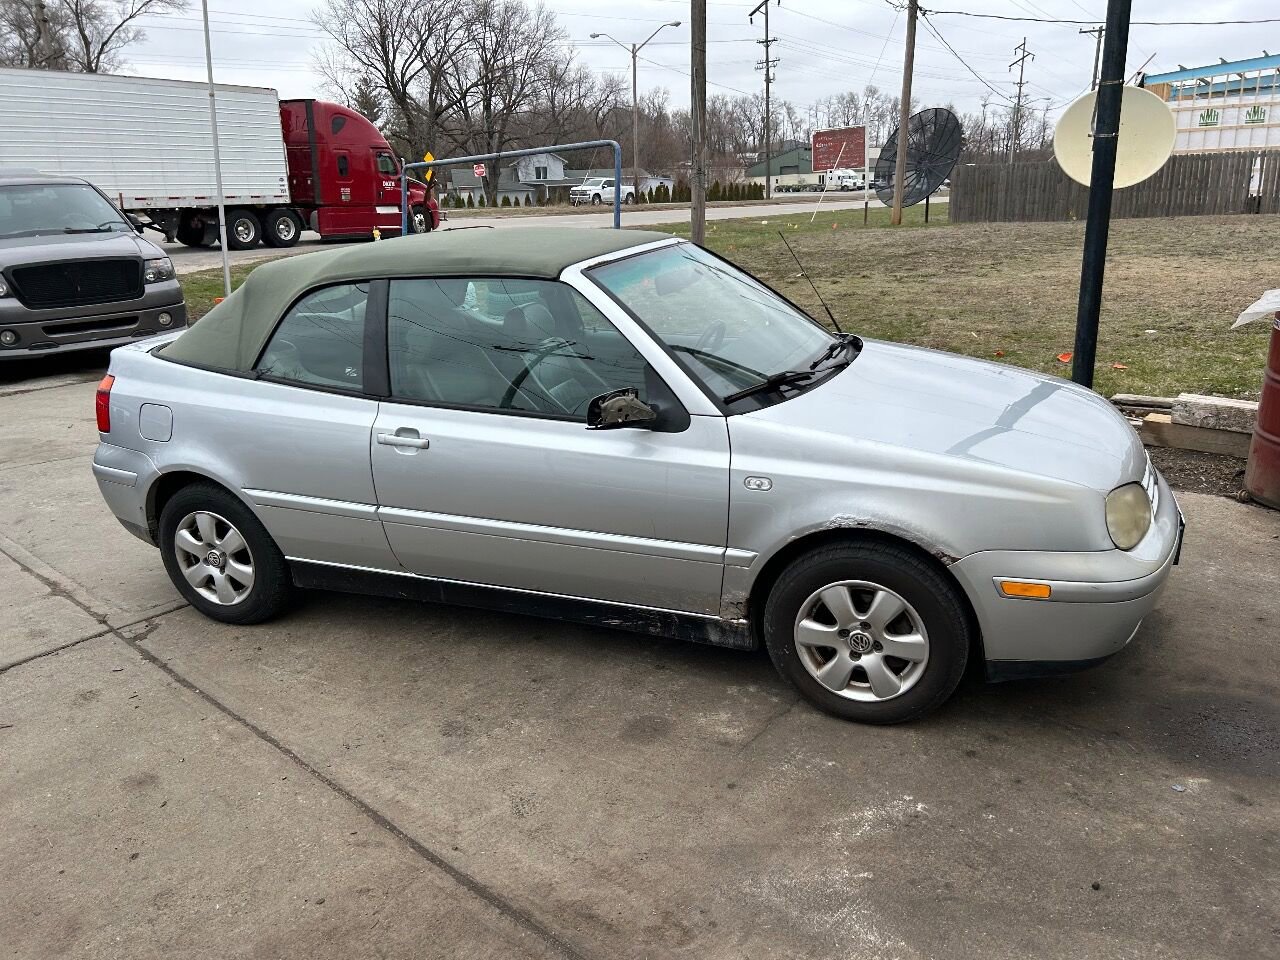 Used Volkswagen Cabrio for Sale Right Now - Autotrader